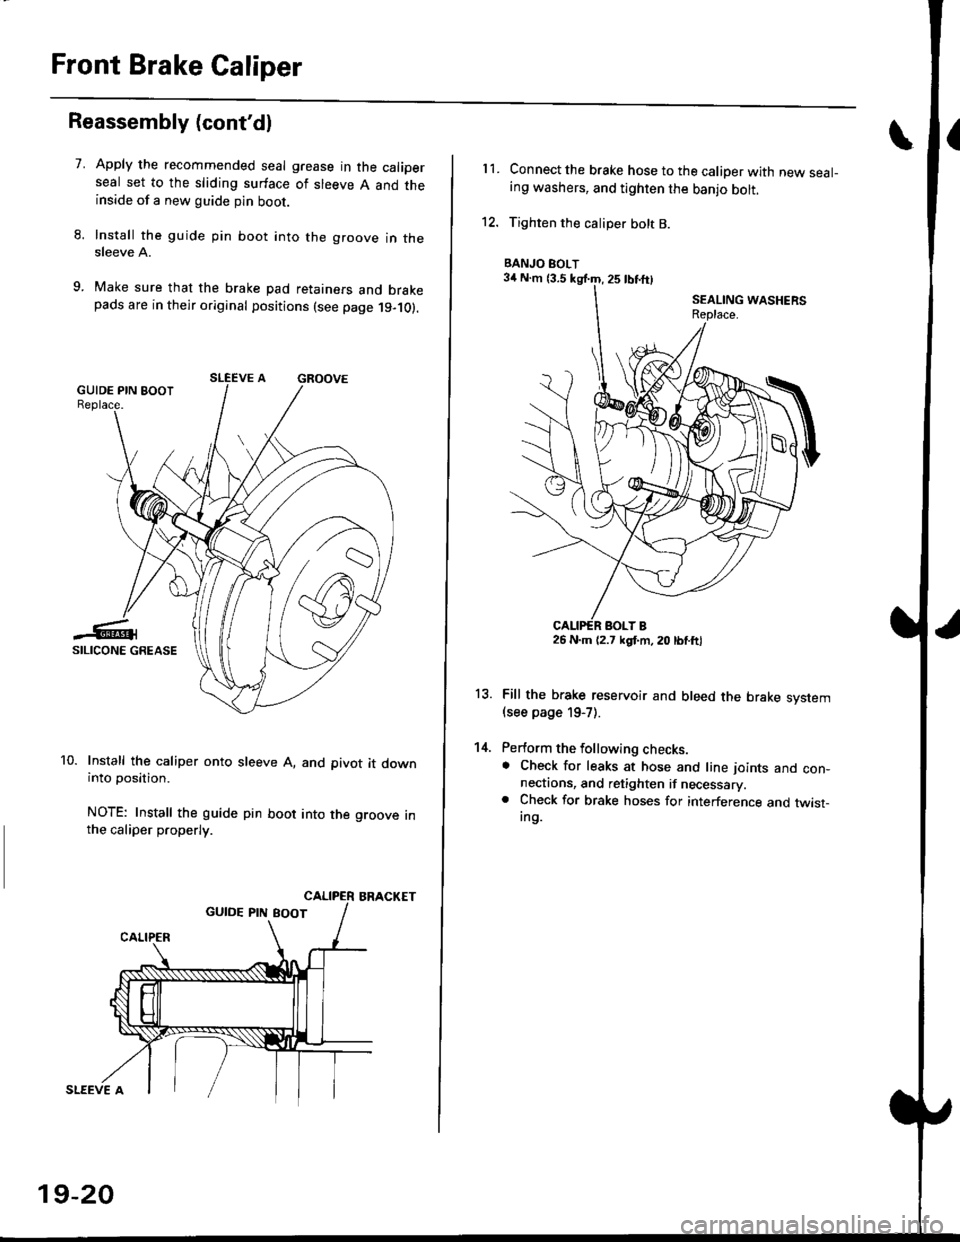 HONDA CIVIC 1996 6.G Workshop Manual Front Brake Caliper
Reassembly (contdl
7.Apply the recommended seal grease in the caliperseal set to the sliding surface of sleeve A and theinside of a new guide pin boot.
Install the guide pin boot 